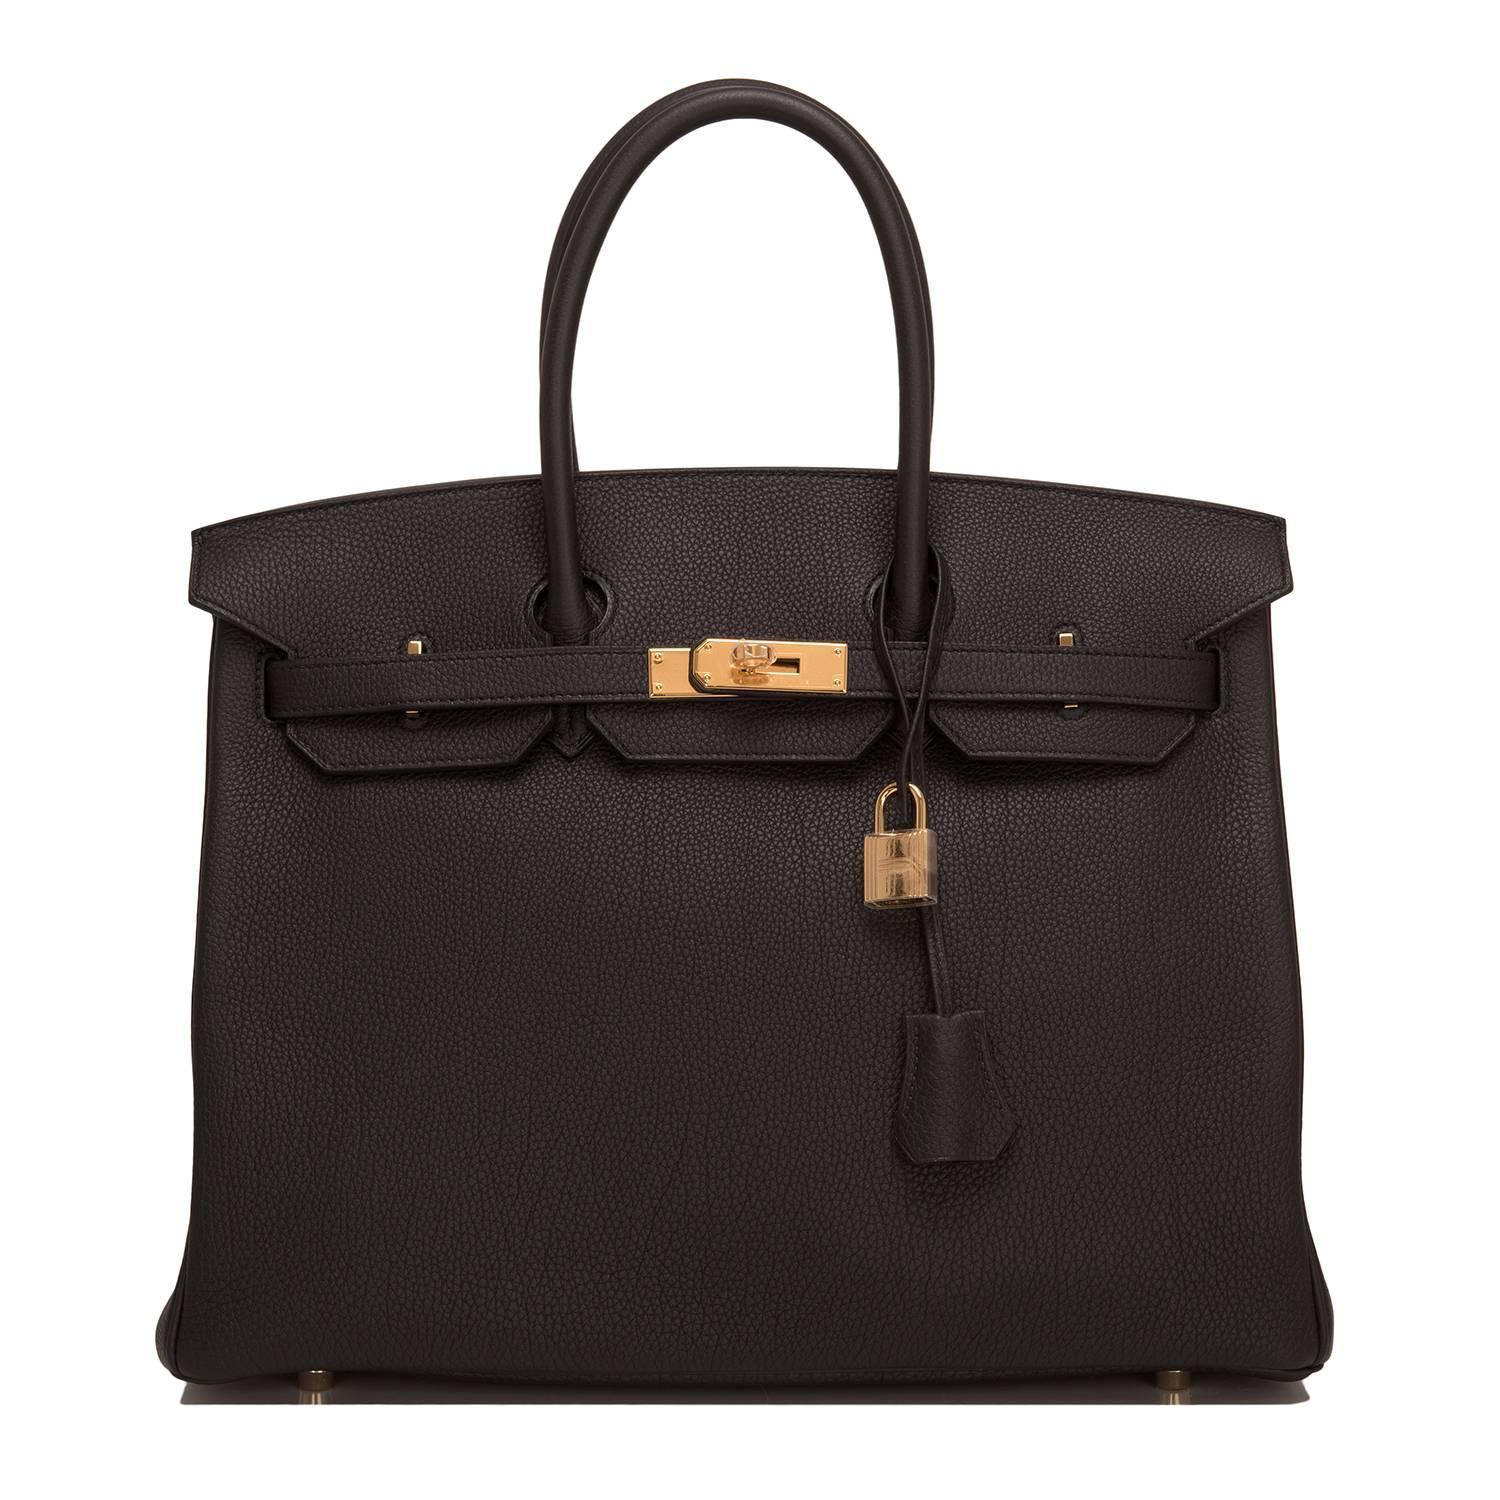 Hermes black Birkin 35cm in togo leather with gold hardware.

This Birkin features tonal stitching, front toggle closure, clochette with lock and two keys, and double rolled handles.

The Interior is lined in Black chevre with one zip pocket